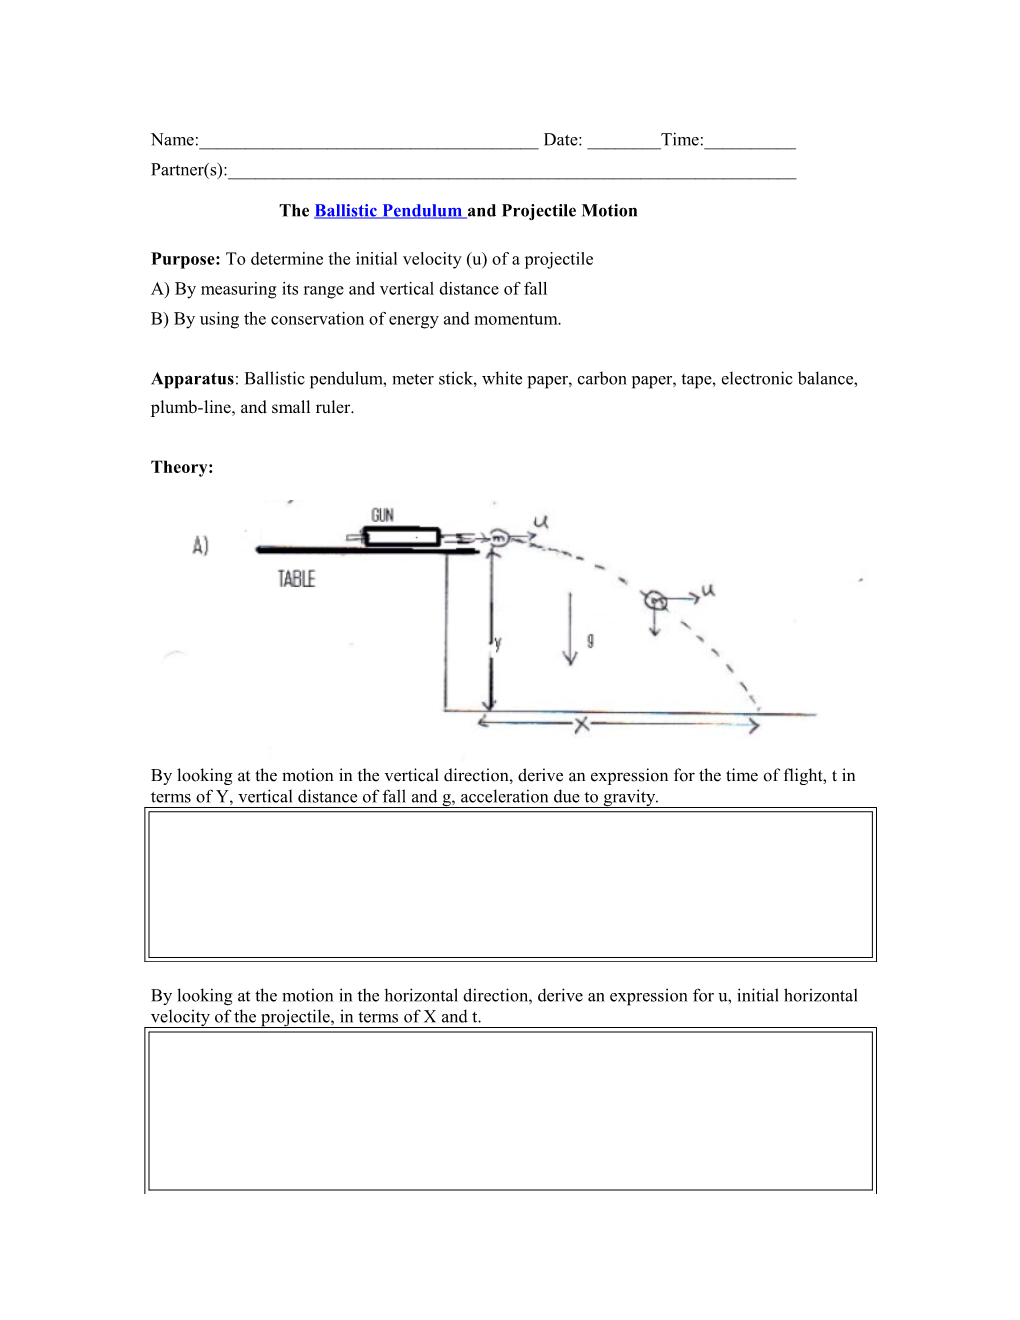 The Ballistic Pendulum and Projectile Motion